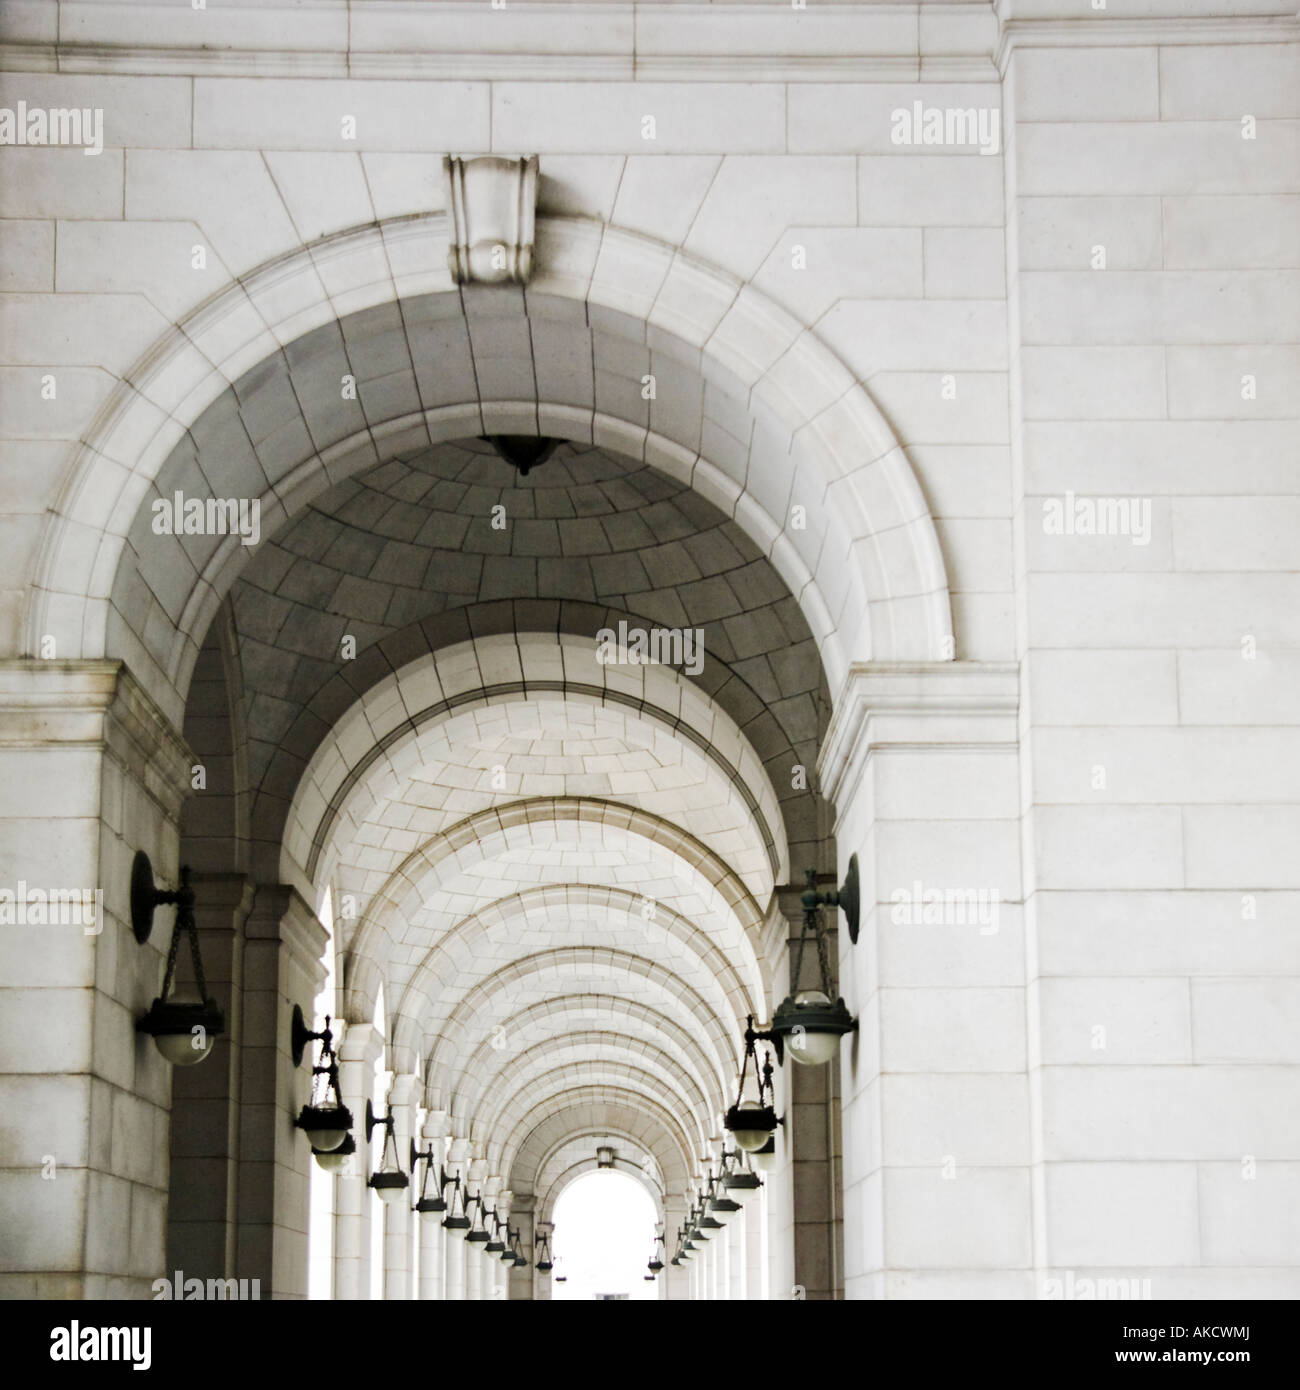 Marble colonnade with wall sconces at Union Station in Washington DC Stock Photo